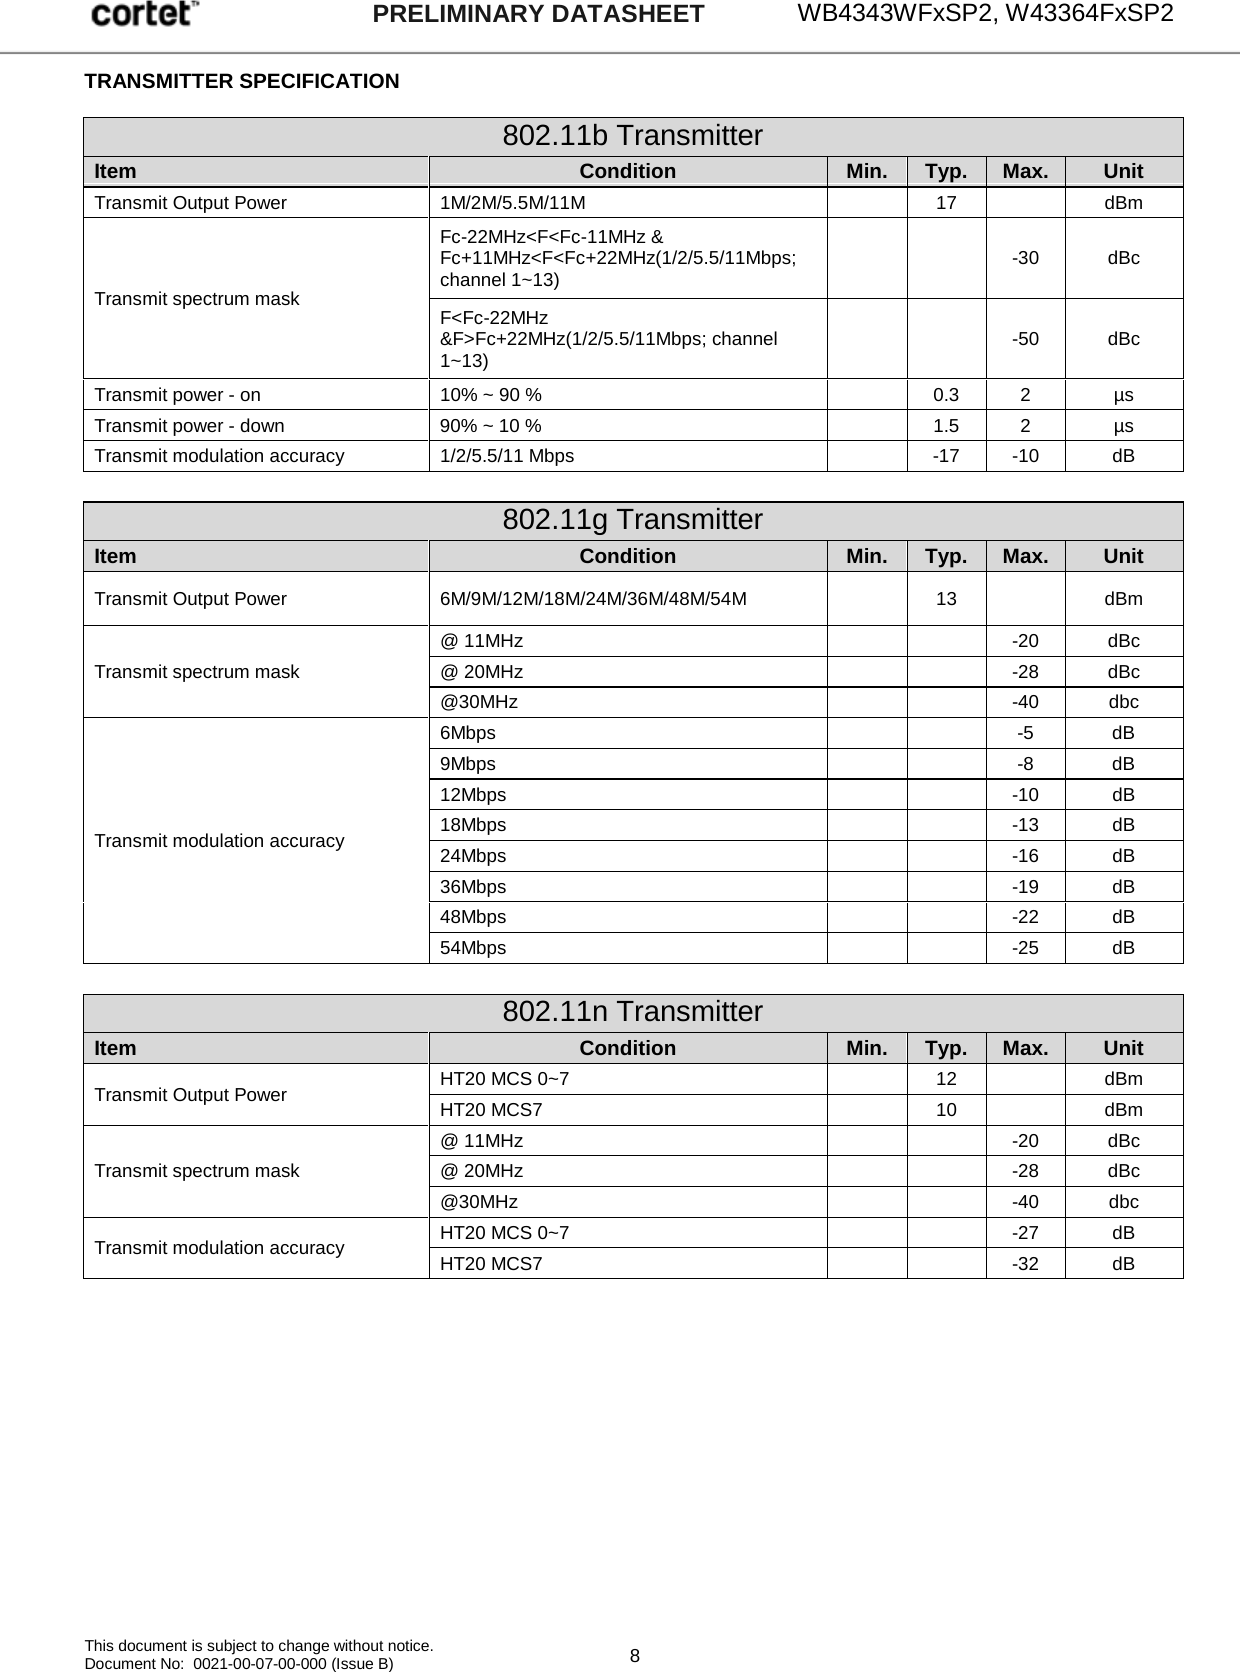     WB4343WFxSP2, W43364FxSP2   This document is subject to change without notice. Document No:  0021-00-07-00-000 (Issue B)  8 PRELIMINARY DATASHEET TRANSMITTER SPECIFICATION  802.11b Transmitter Item Condition Min. Typ. Max. Unit Transmit Output Power 1M/2M/5.5M/11M  17  dBm Transmit spectrum mask Fc-22MHz&lt;F&lt;Fc-11MHz &amp; Fc+11MHz&lt;F&lt;Fc+22MHz(1/2/5.5/11Mbps; channel 1~13)     -30 dBc F&lt;Fc-22MHz &amp;F&gt;Fc+22MHz(1/2/5.5/11Mbps; channel 1~13)     -50 dBc Transmit power - on 10% ~ 90 %  0.3  2  µs Transmit power - down 90% ~ 10 %  1.5  2  µs Transmit modulation accuracy 1/2/5.5/11 Mbps  -17  -10 dB       802.11g Transmitter Item Condition Min. Typ. Max. Unit Transmit Output Power 6M/9M/12M/18M/24M/36M/48M/54M  13  dBm Transmit spectrum mask @ 11MHz   -20 dBc @ 20MHz   -28 dBc @30MHz   -40  dbc Transmit modulation accuracy 6Mbps   -5  dB 9Mbps   -8  dB 12Mbps   -10 dB 18Mbps   -13 dB 24Mbps   -16 dB 36Mbps   -19 dB 48Mbps   -22 dB 54Mbps   -25 dB       802.11n Transmitter Item Condition Min. Typ. Max. Unit Transmit Output Power HT20 MCS 0~7  12  dBm HT20 MCS7  10  dBm Transmit spectrum mask @ 11MHz   -20 dBc @ 20MHz   -28 dBc @30MHz   -40 dbc Transmit modulation accuracy HT20 MCS 0~7   -27 dB HT20 MCS7   -32 dB                  